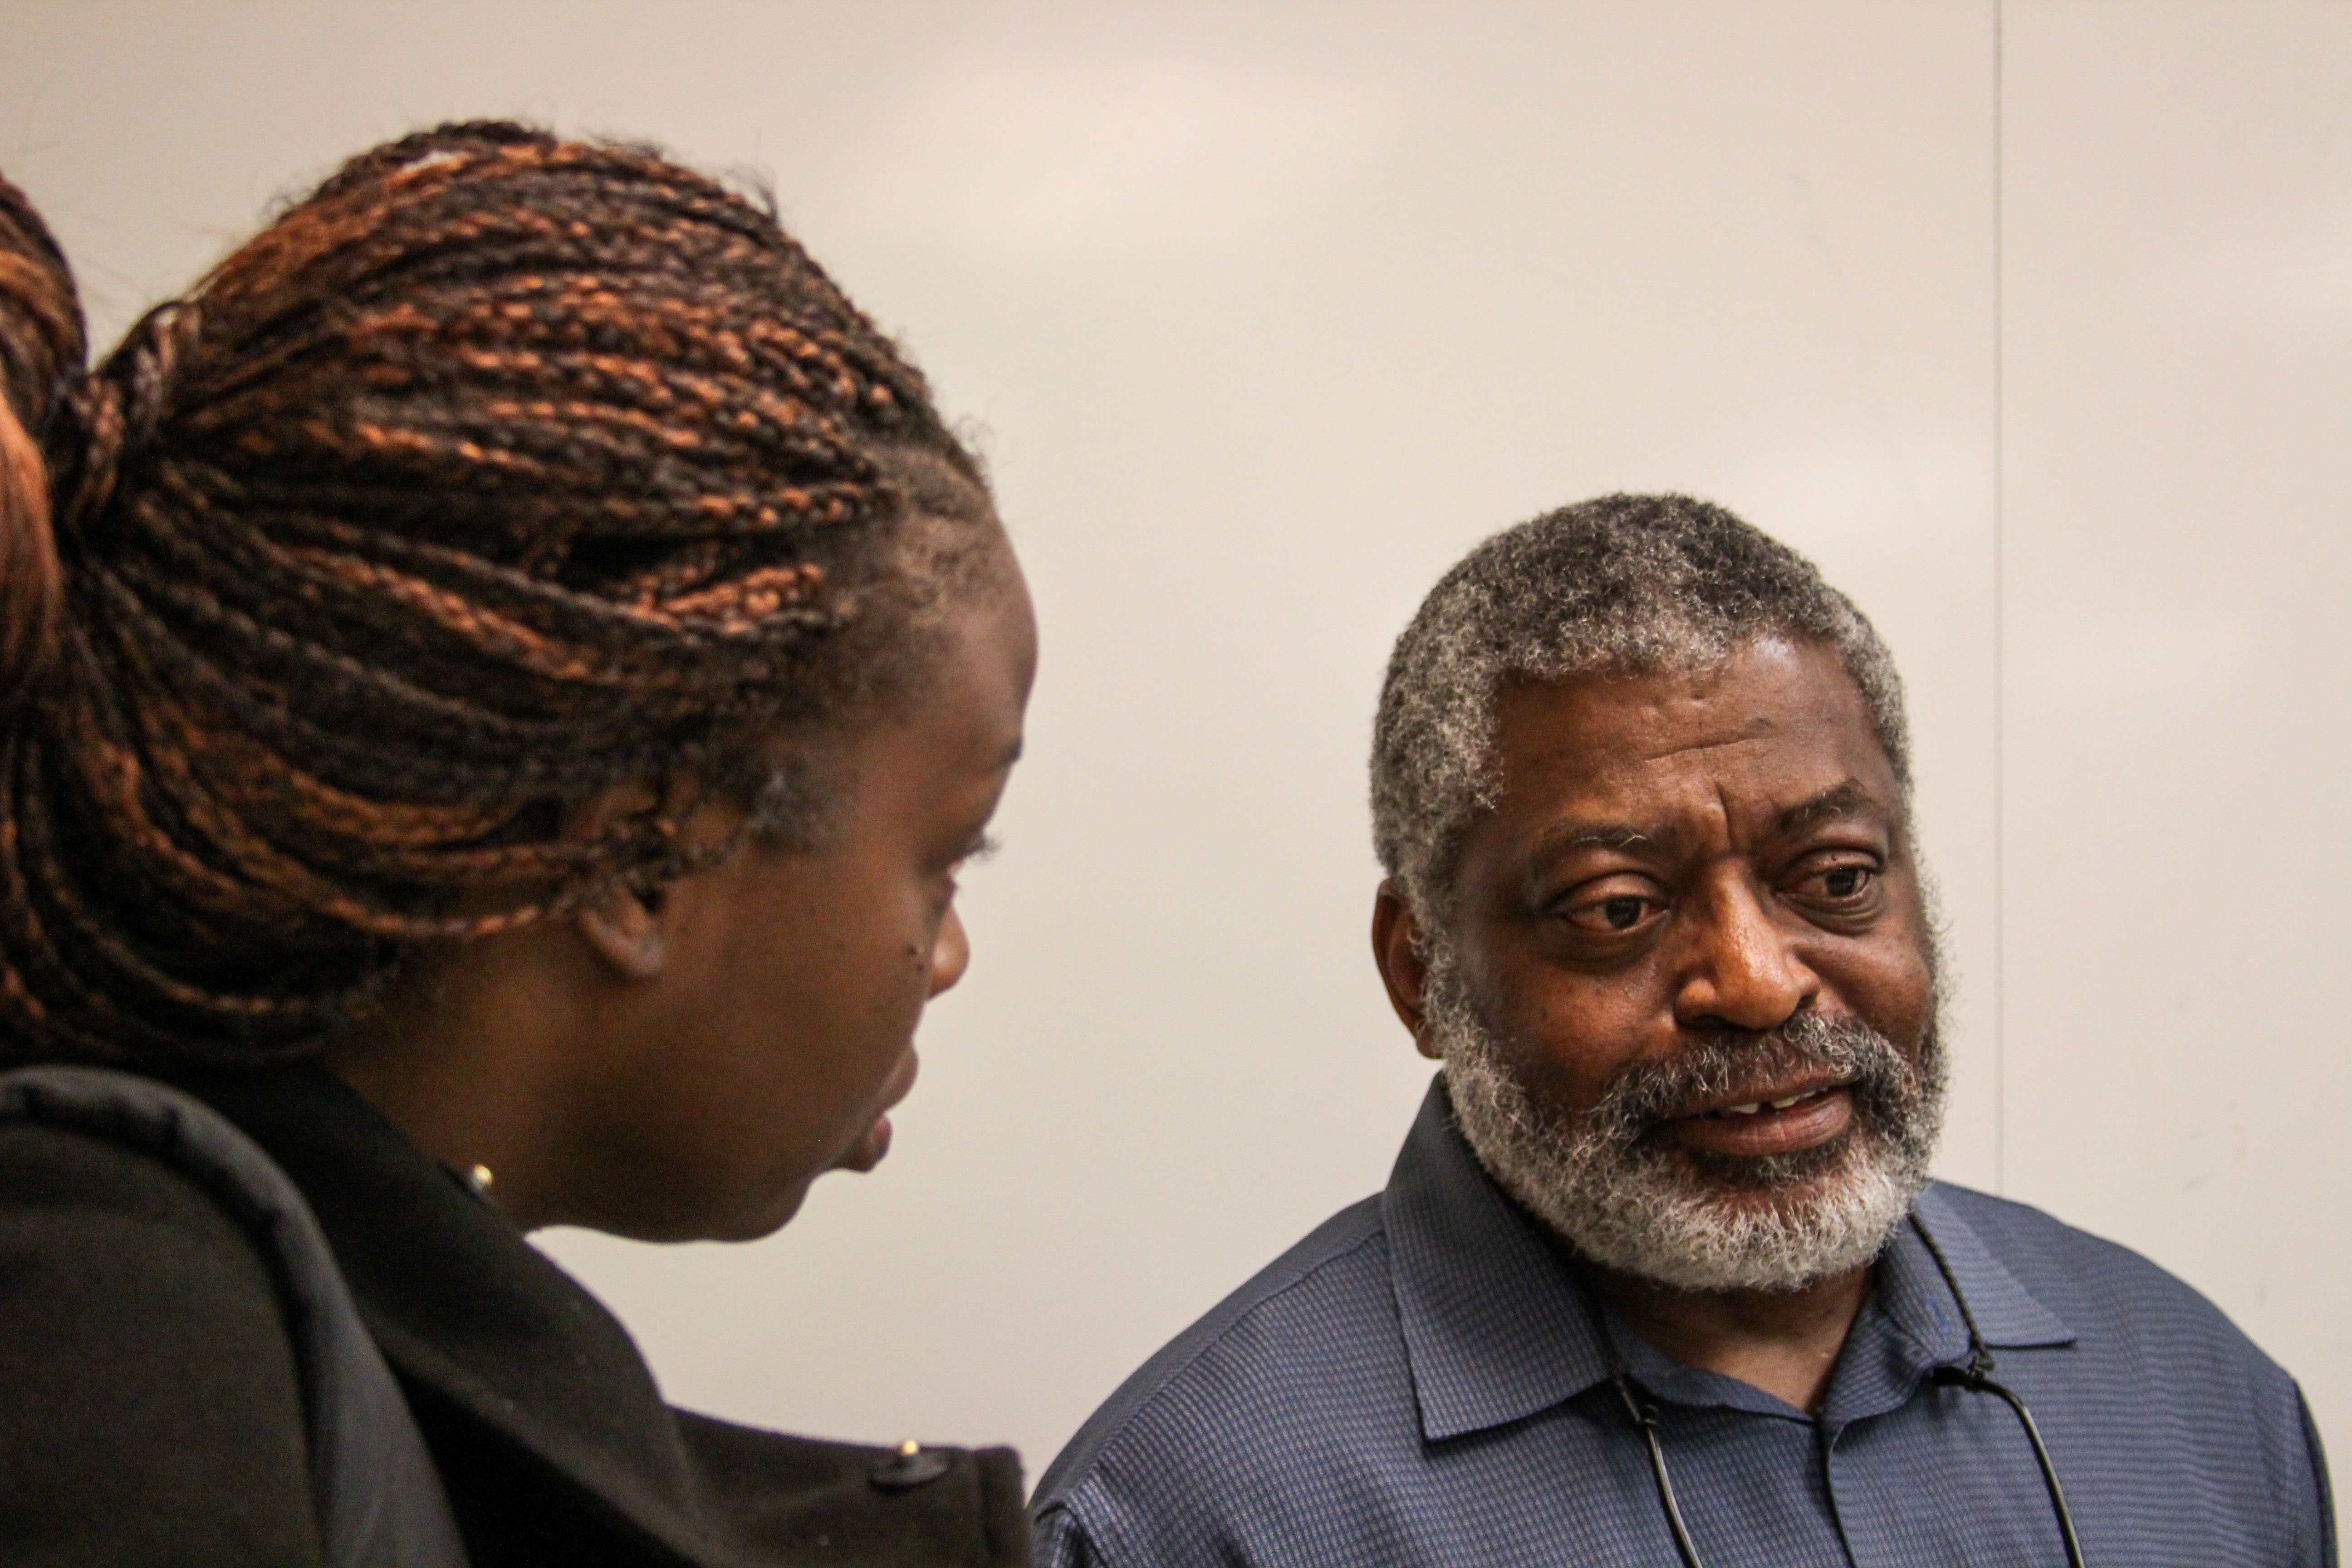 City College Psychology Professor Dr. Terry Day works closely with his students who are often inspired by his experiences.